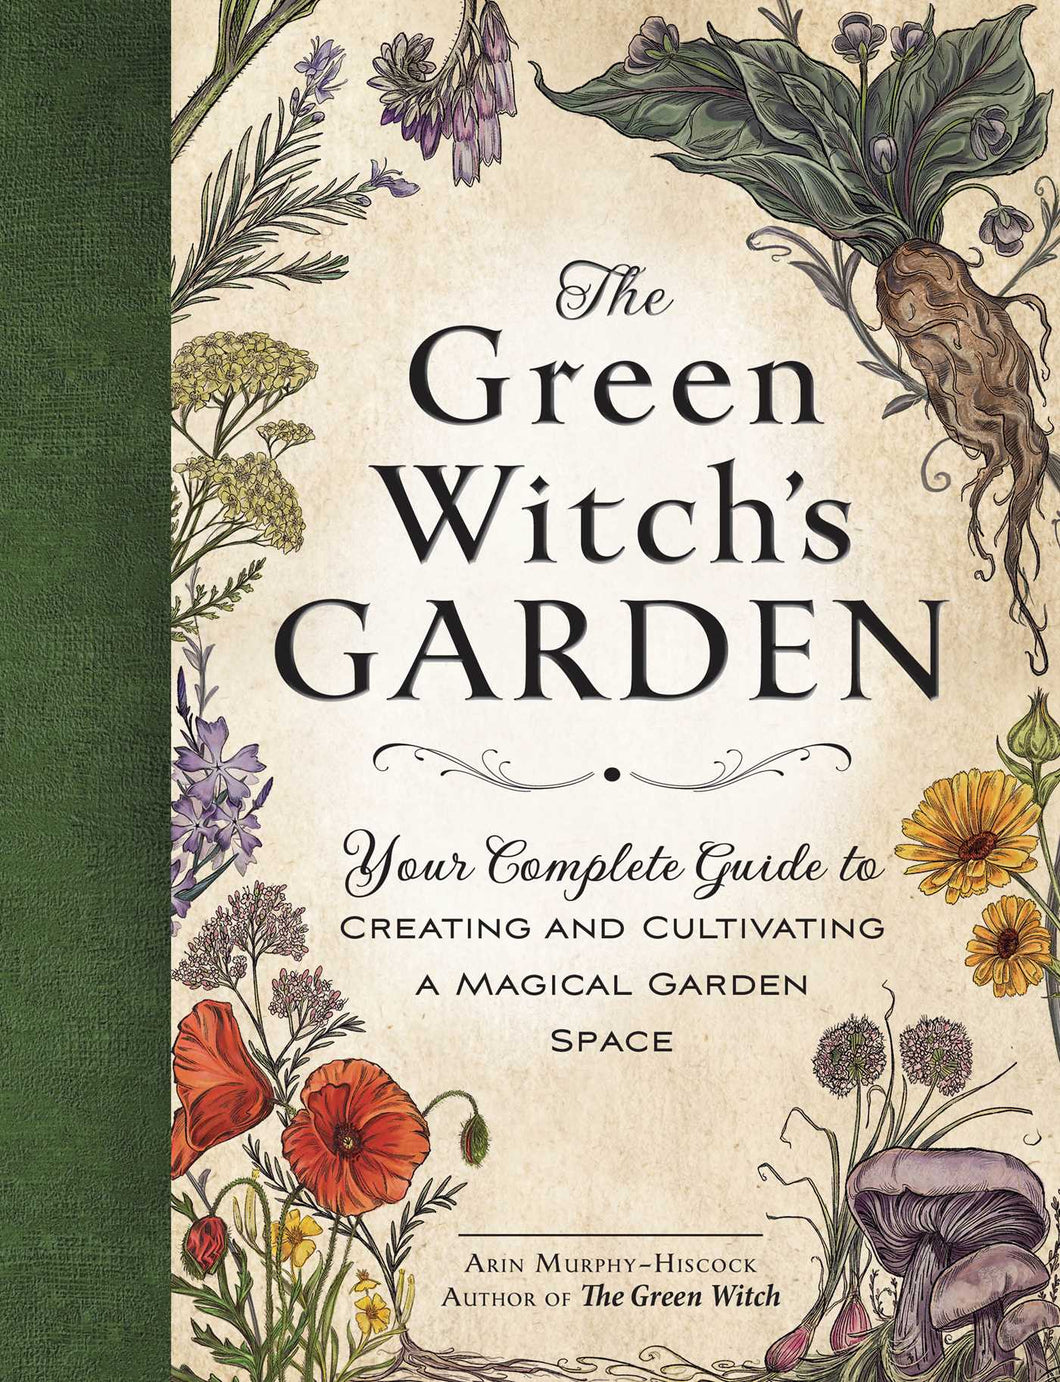 The Green Witch's Garden by Arin Murphy-Hiscock (HC)